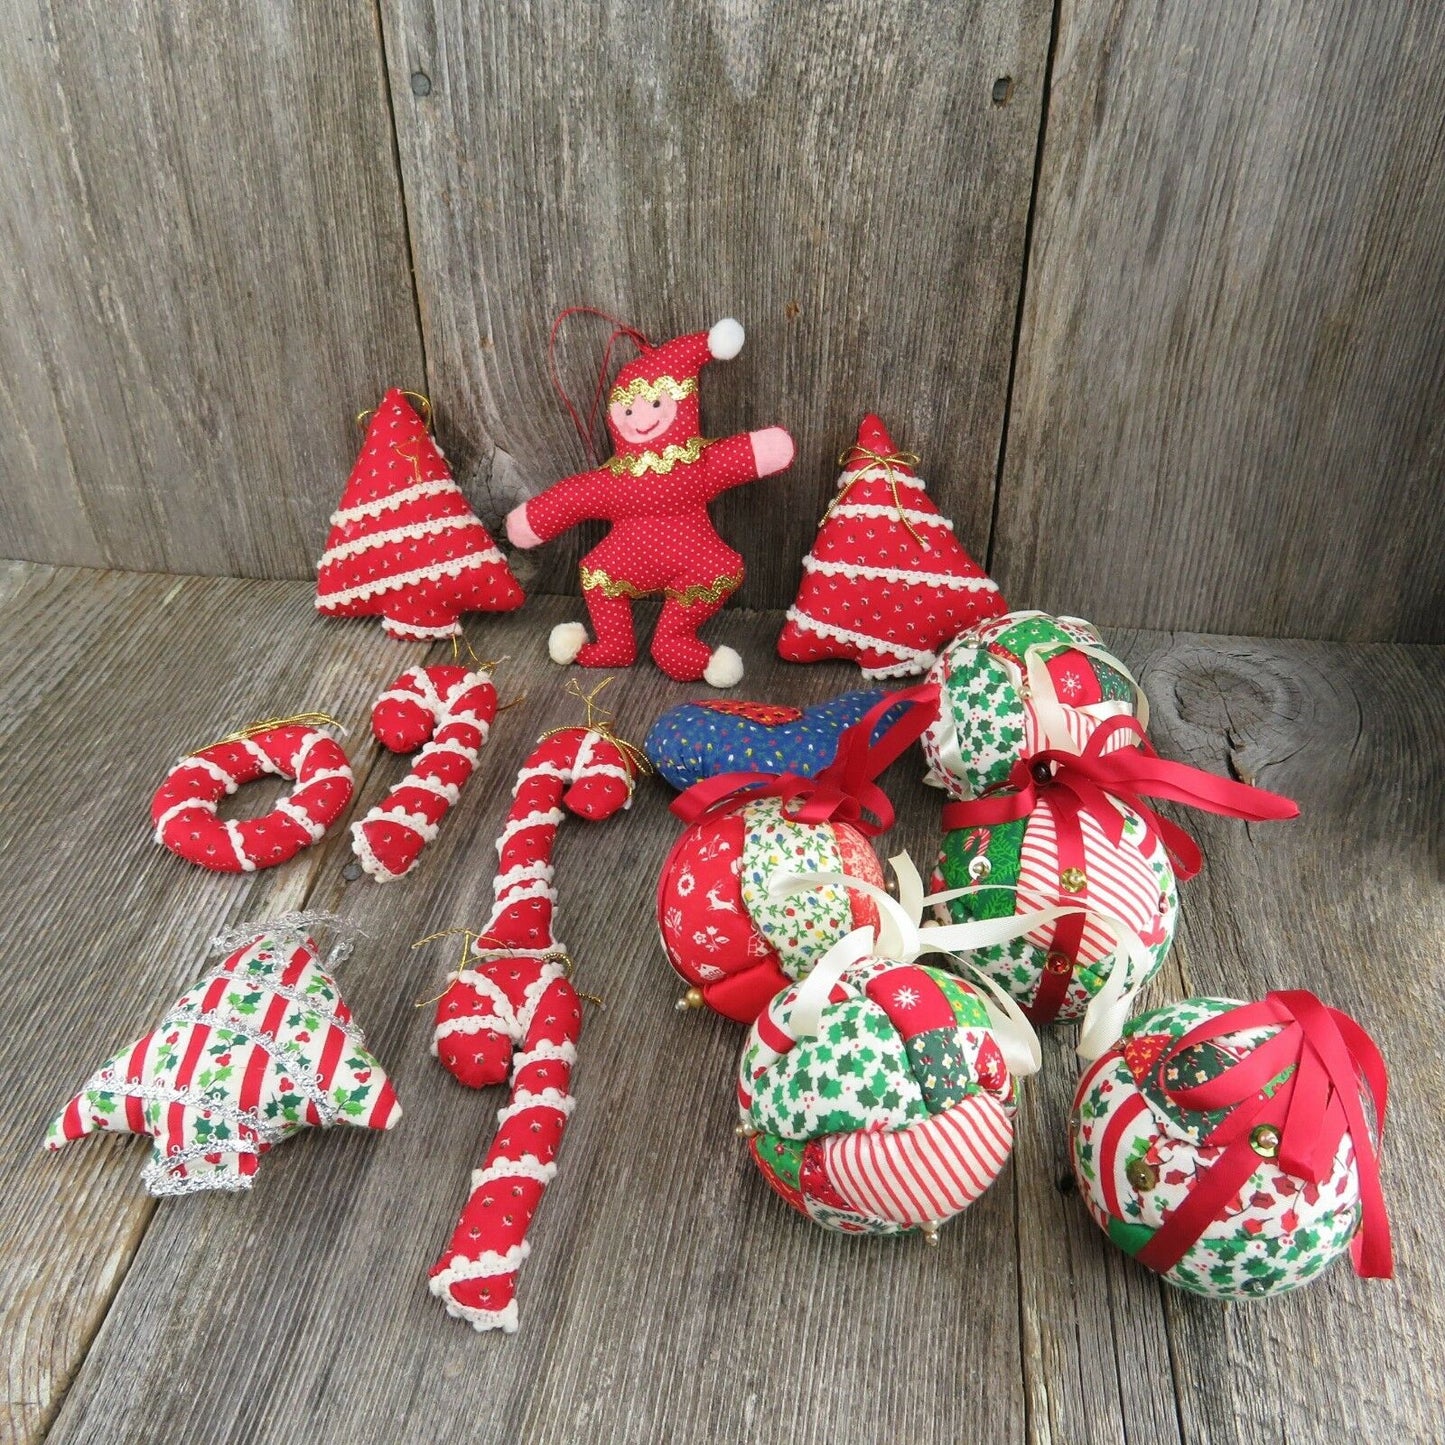 Vintage Christmas Fabric Tree Ornaments Ball Quilt Stuffed Rustic Country Candy - At Grandma's Table